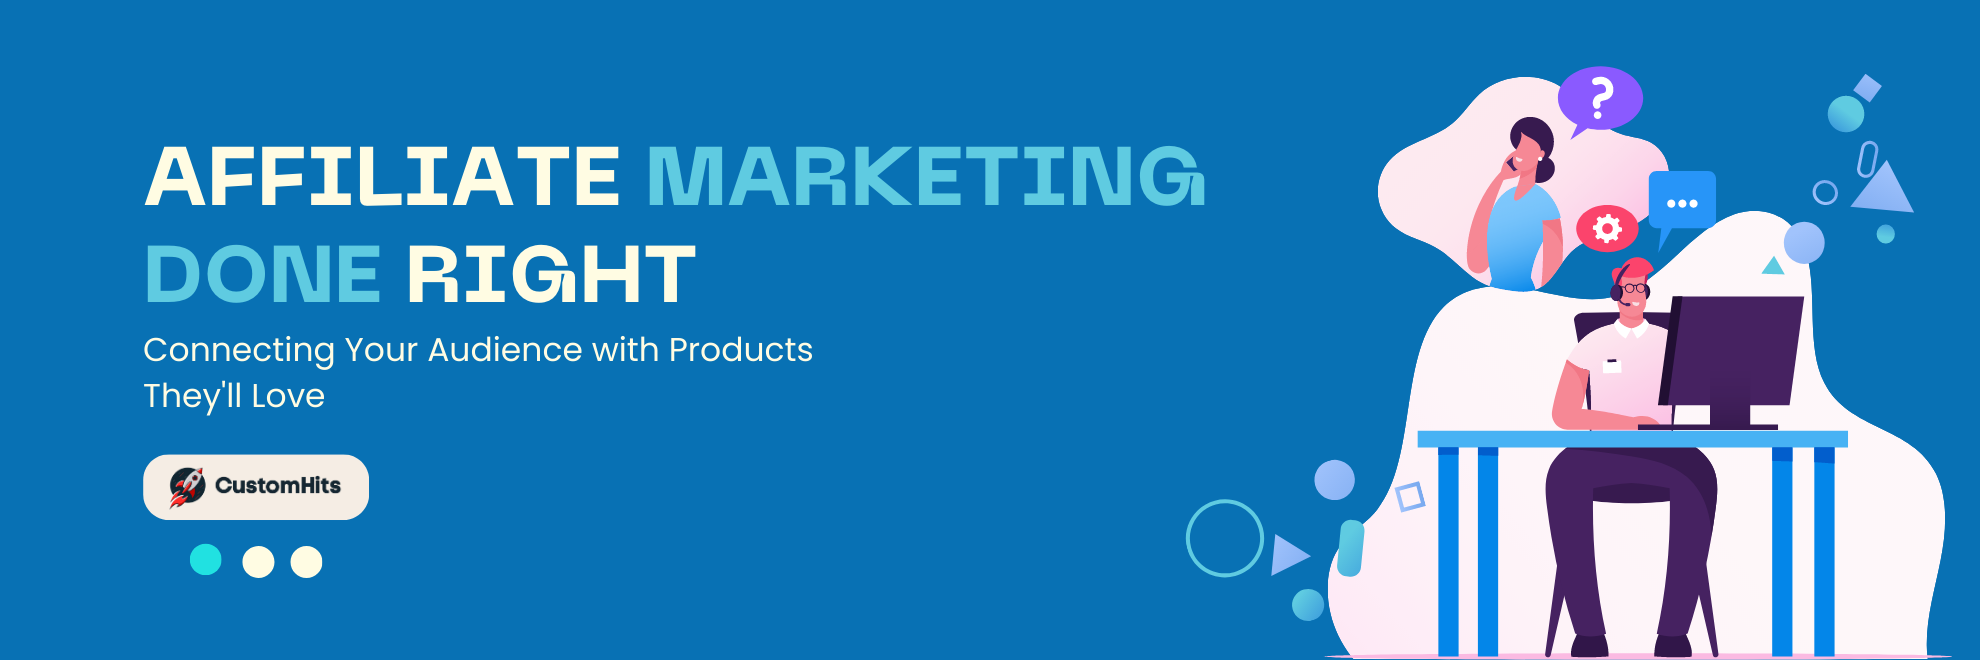 Affiliate Marketing Done Right: Connecting Your Audience with Products They'll Love